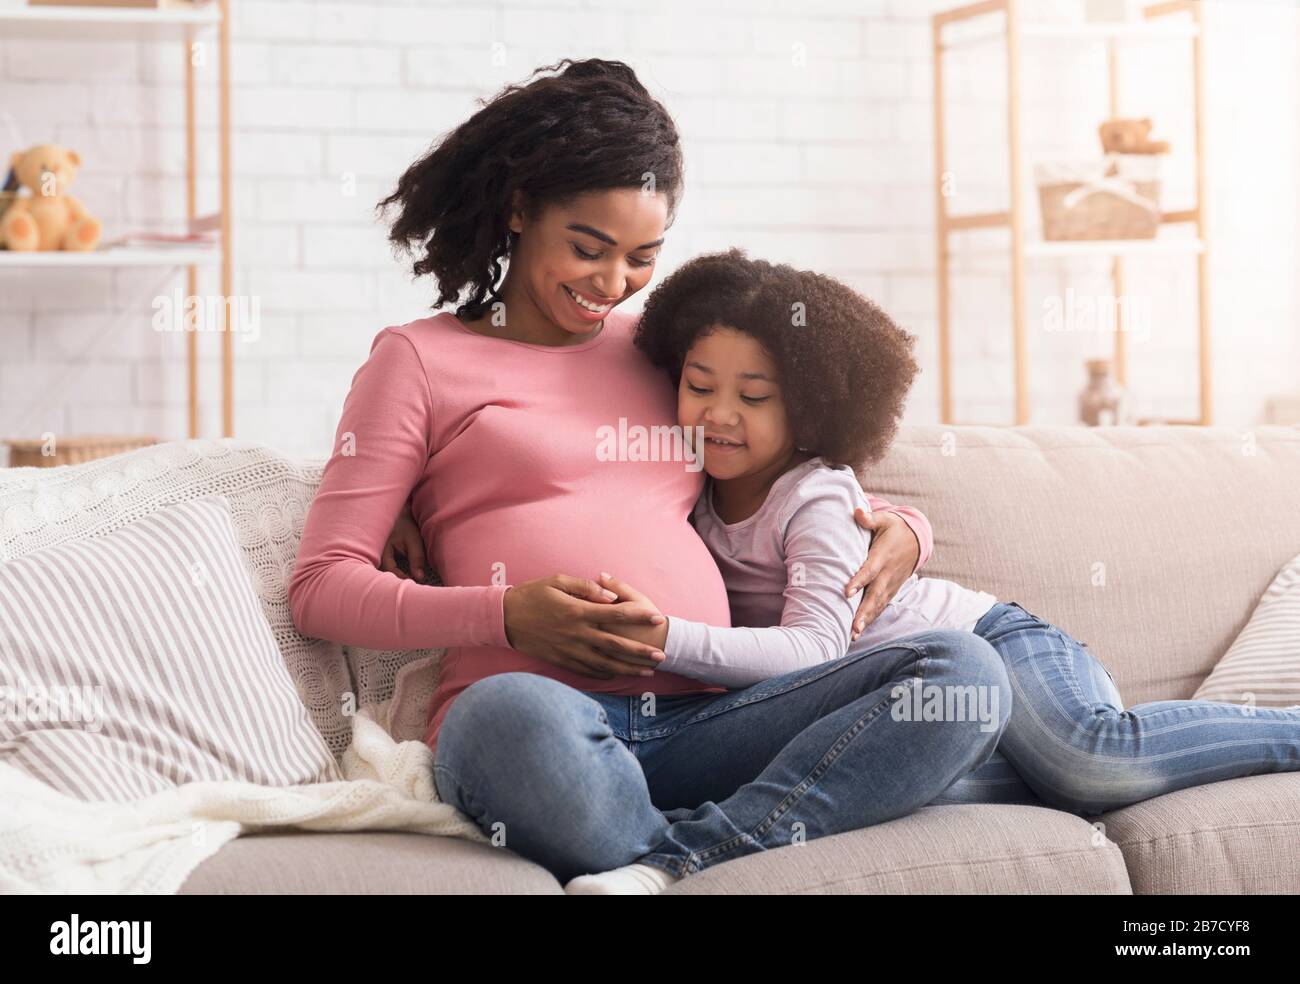 Affectionate Little Daughter Tenderly Touching Belly Of Pregnant Mom On Sofa Stock Photo